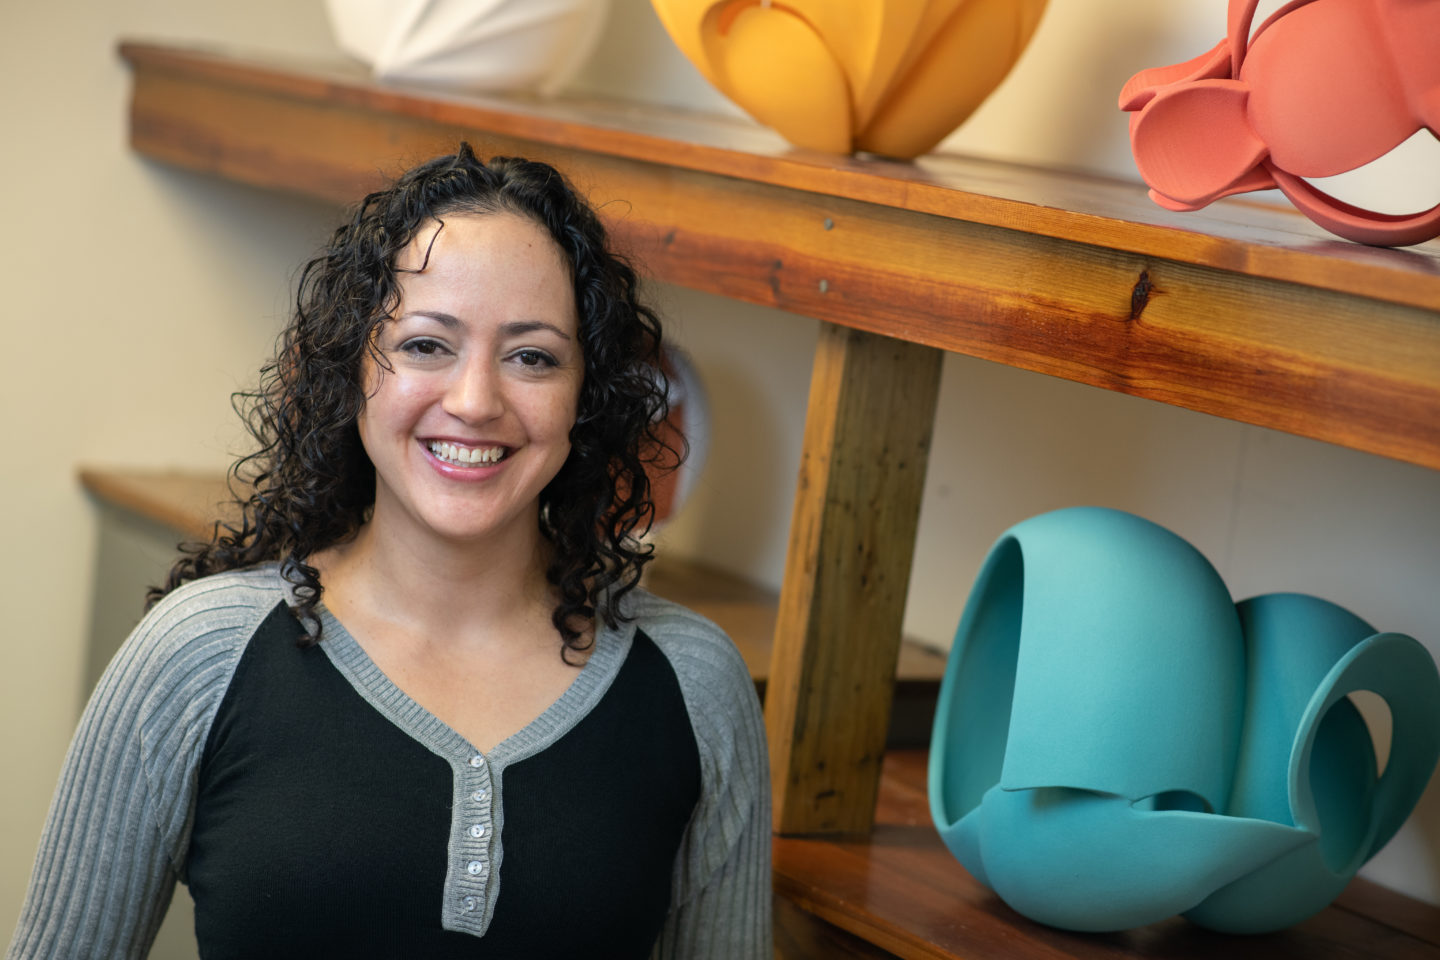 Kira Enriquez Loya has always been passionate about ceramics. Now serving as chair of the Department of Art and Design, Loya inspires students to better understand how they can bring their personal experiences into their art.